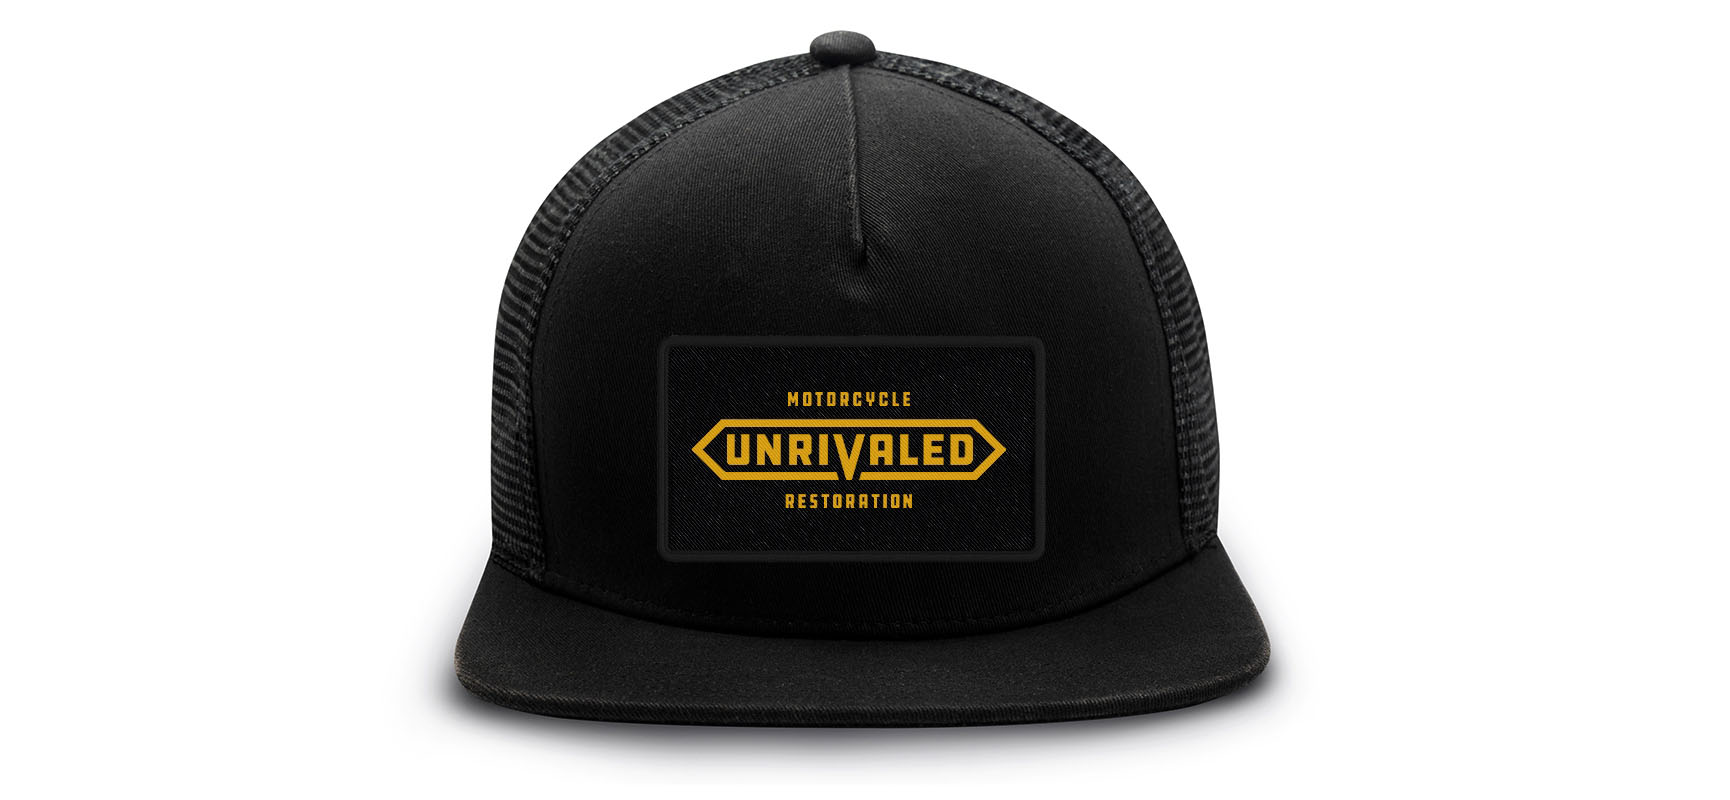 Unrivaled hat